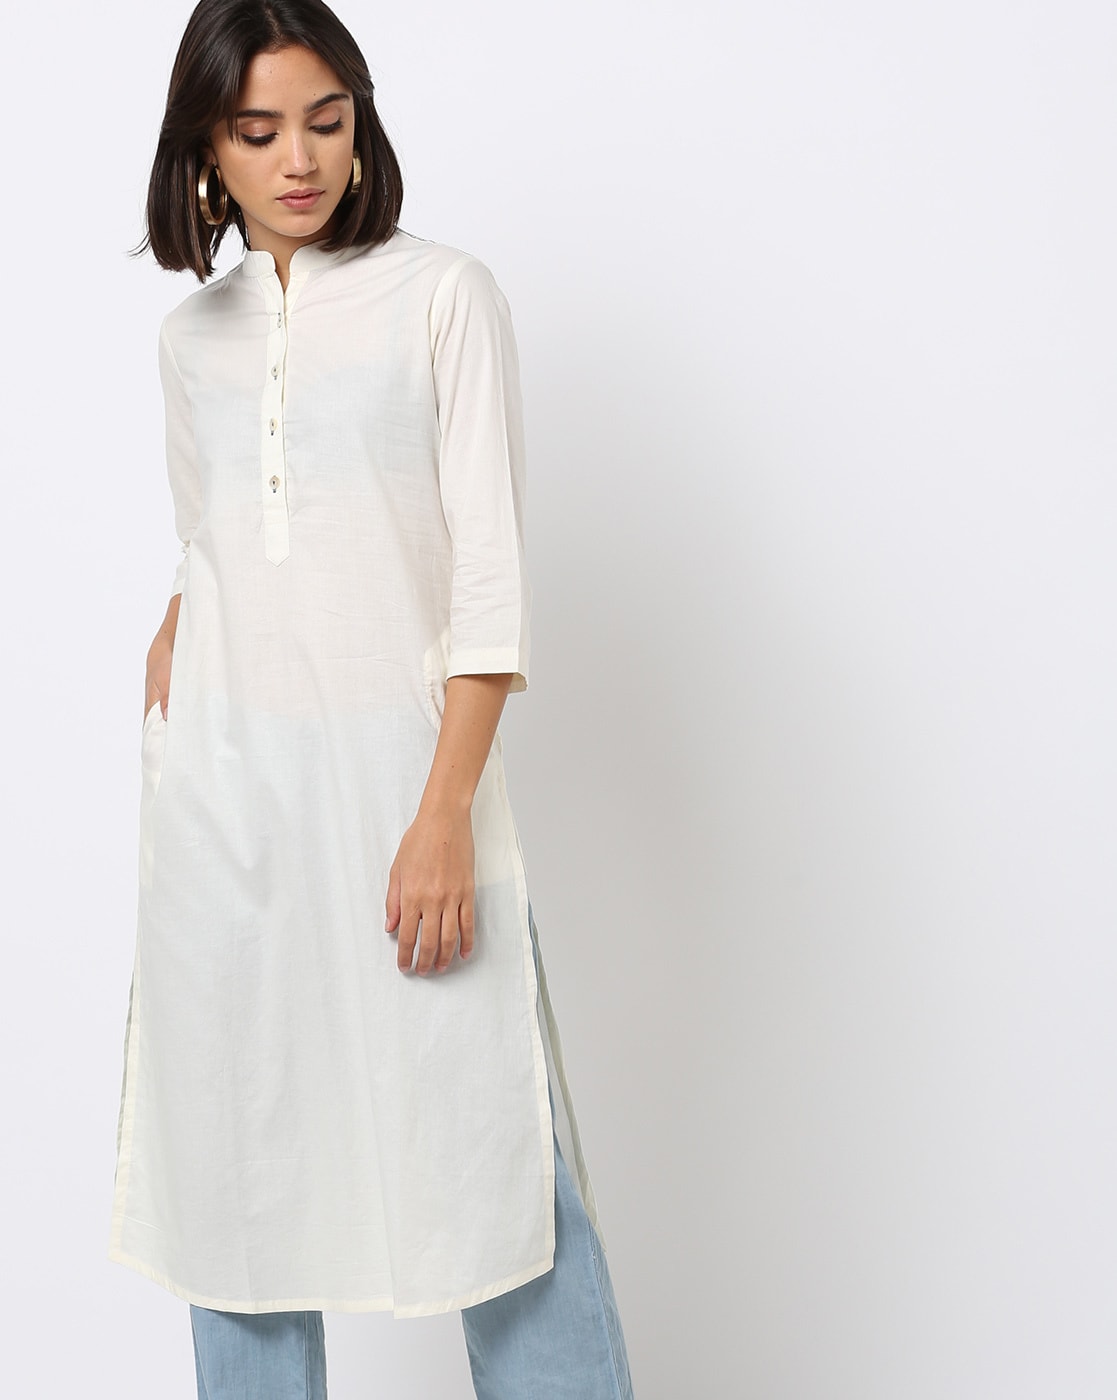 HIGH NECK KURTI WITH JEANS
HOW TO STYLE KURTI WITH JEANS